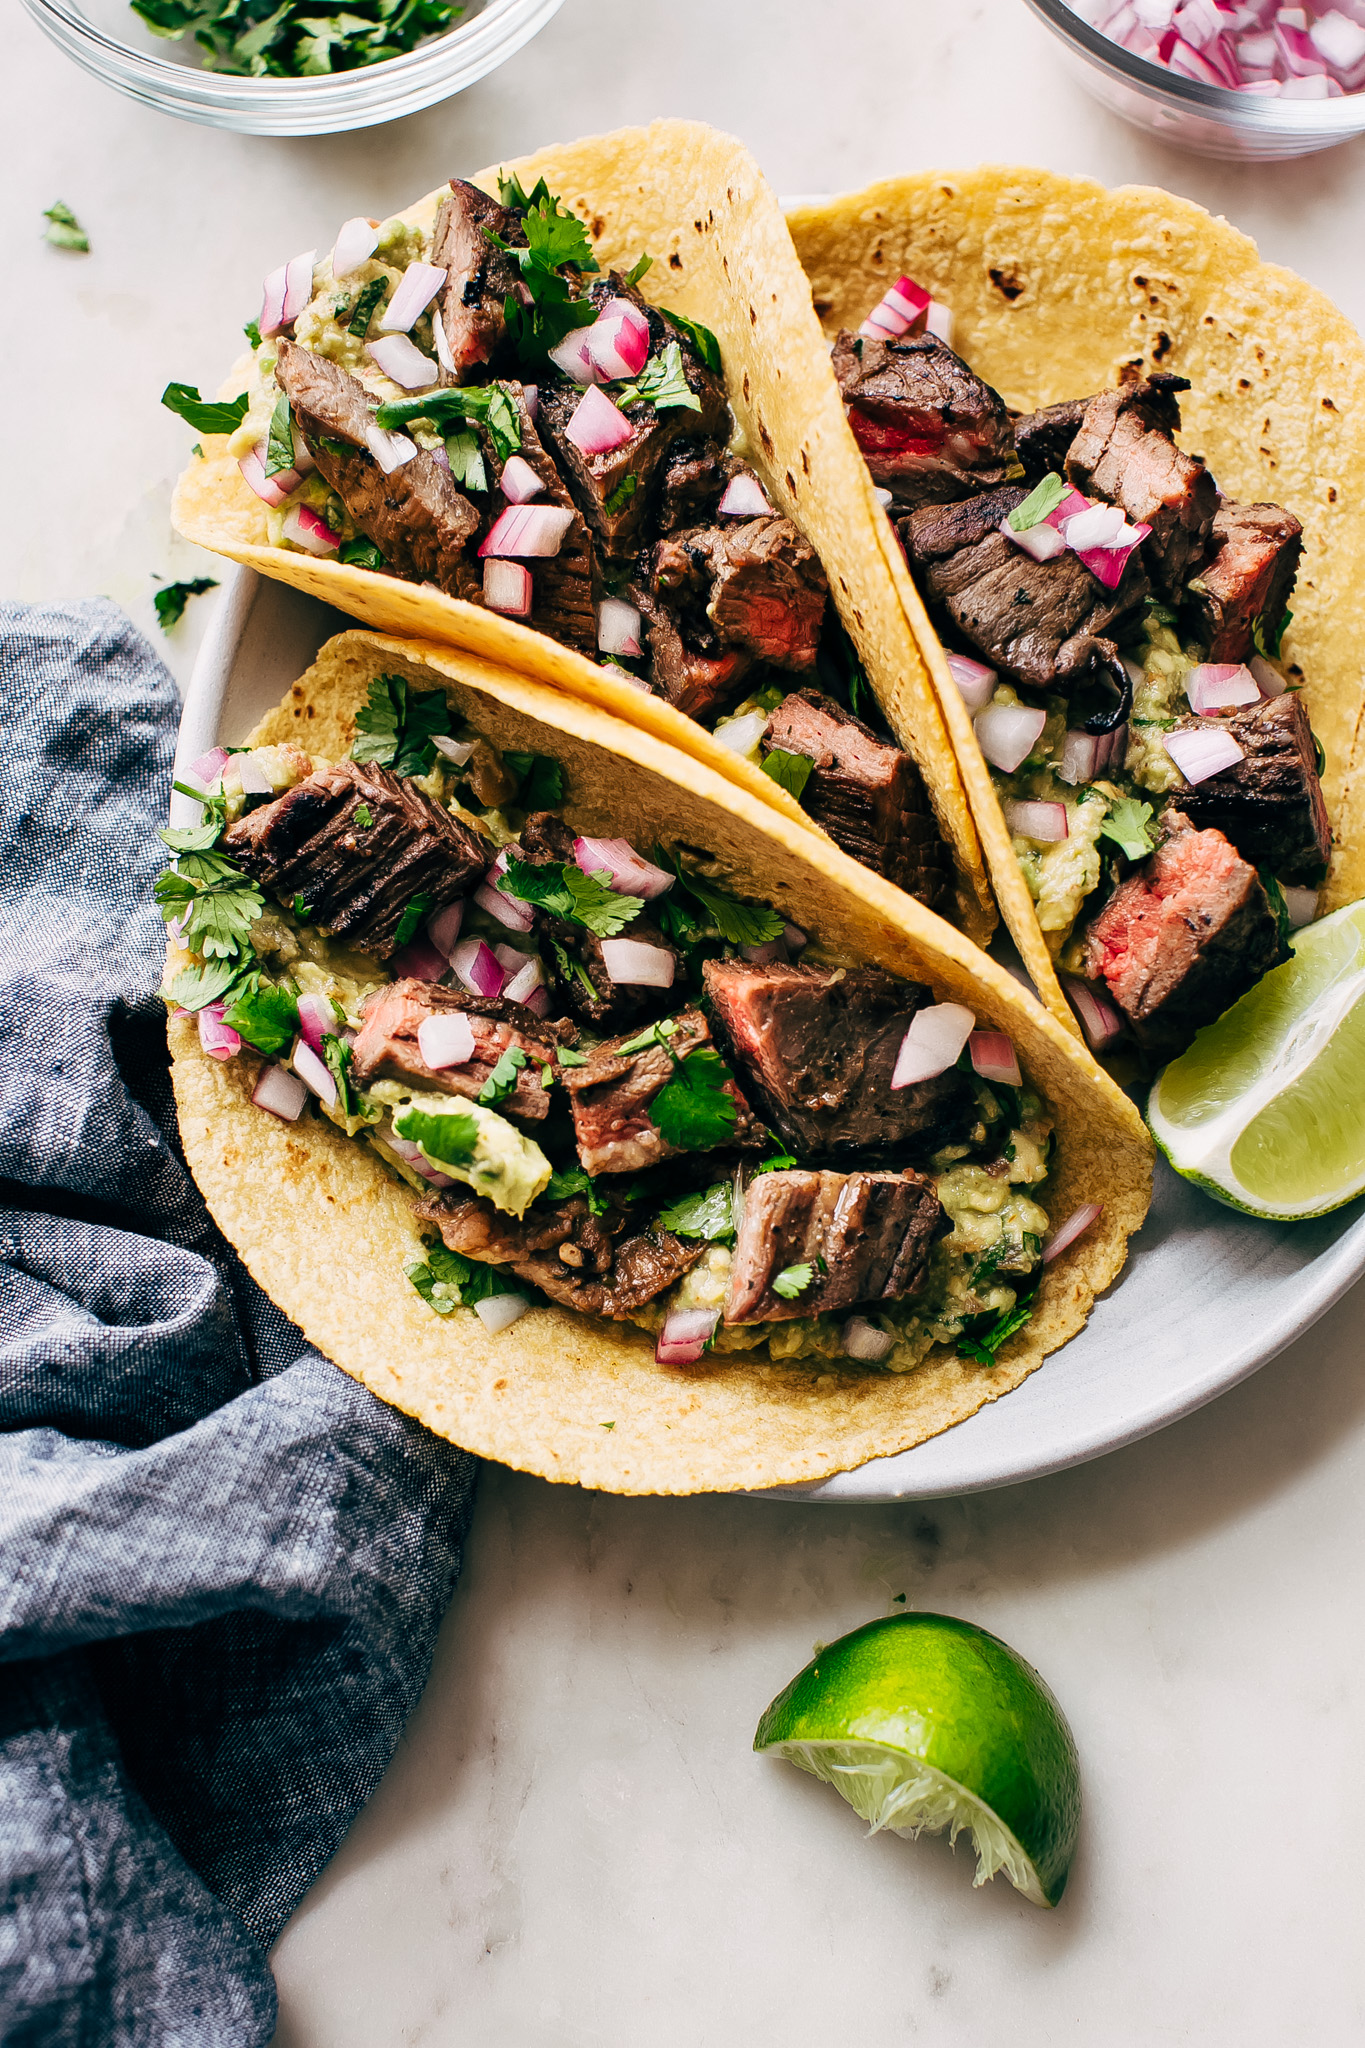 Three soft tacos filled with beef slices and bright salsa.